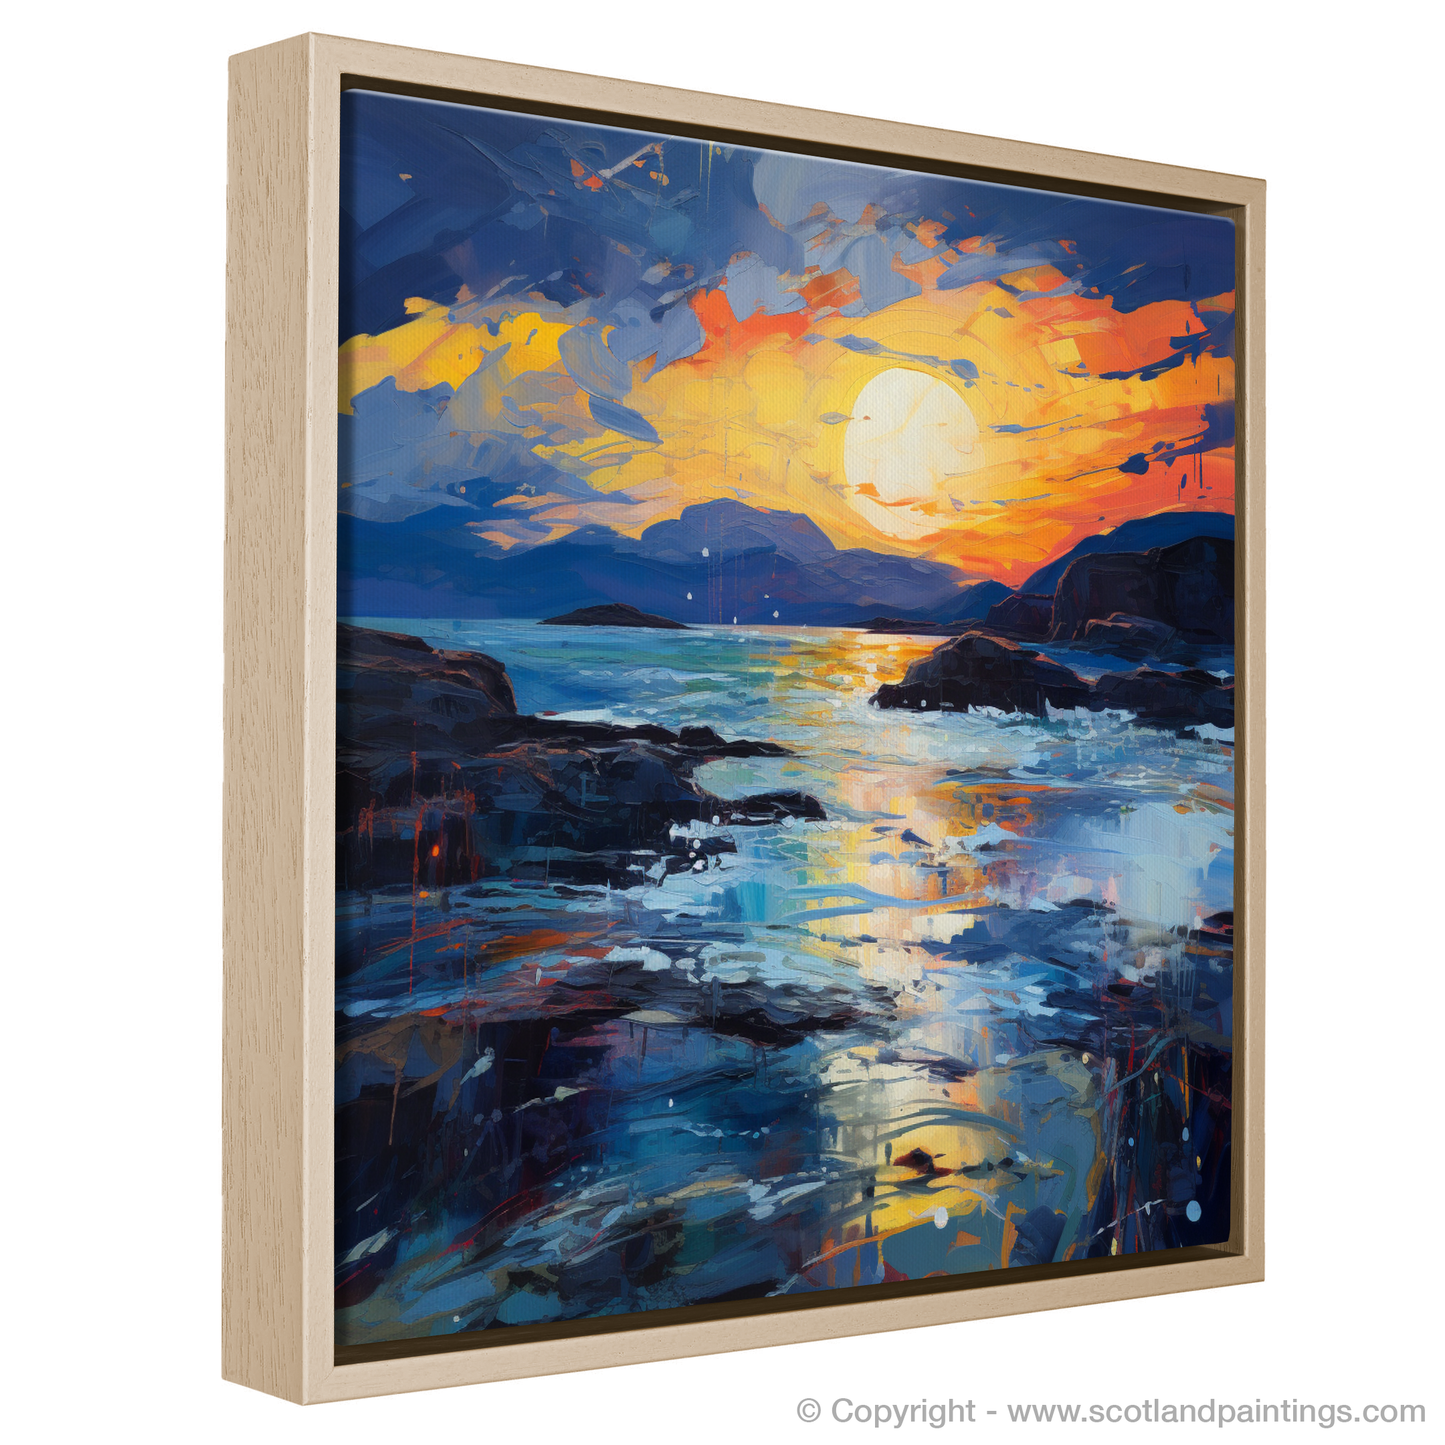 Painting and Art Print of Sound of Iona at dusk entitled "Ablaze at Dusk: Sound of Iona".